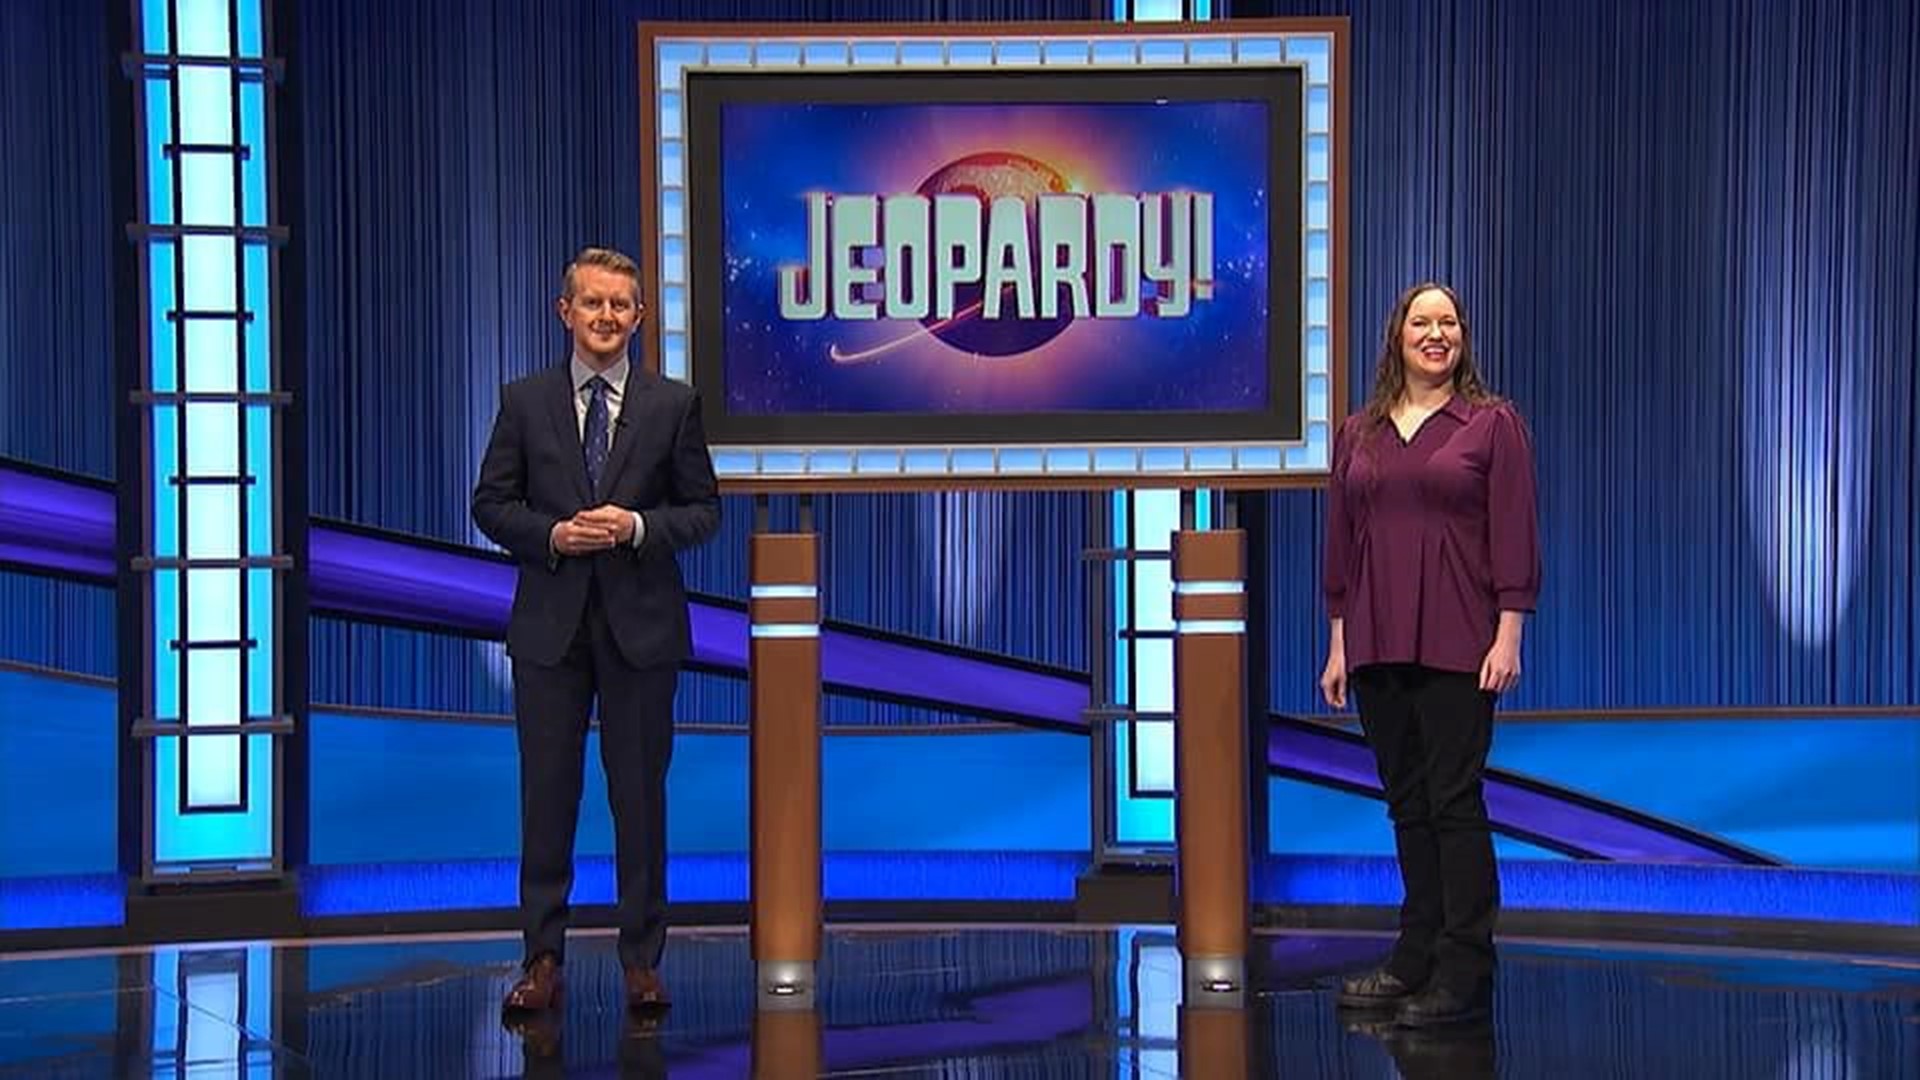 Melissa Woodall appeared on the popular game show Jeopardy! on Sept. 16.